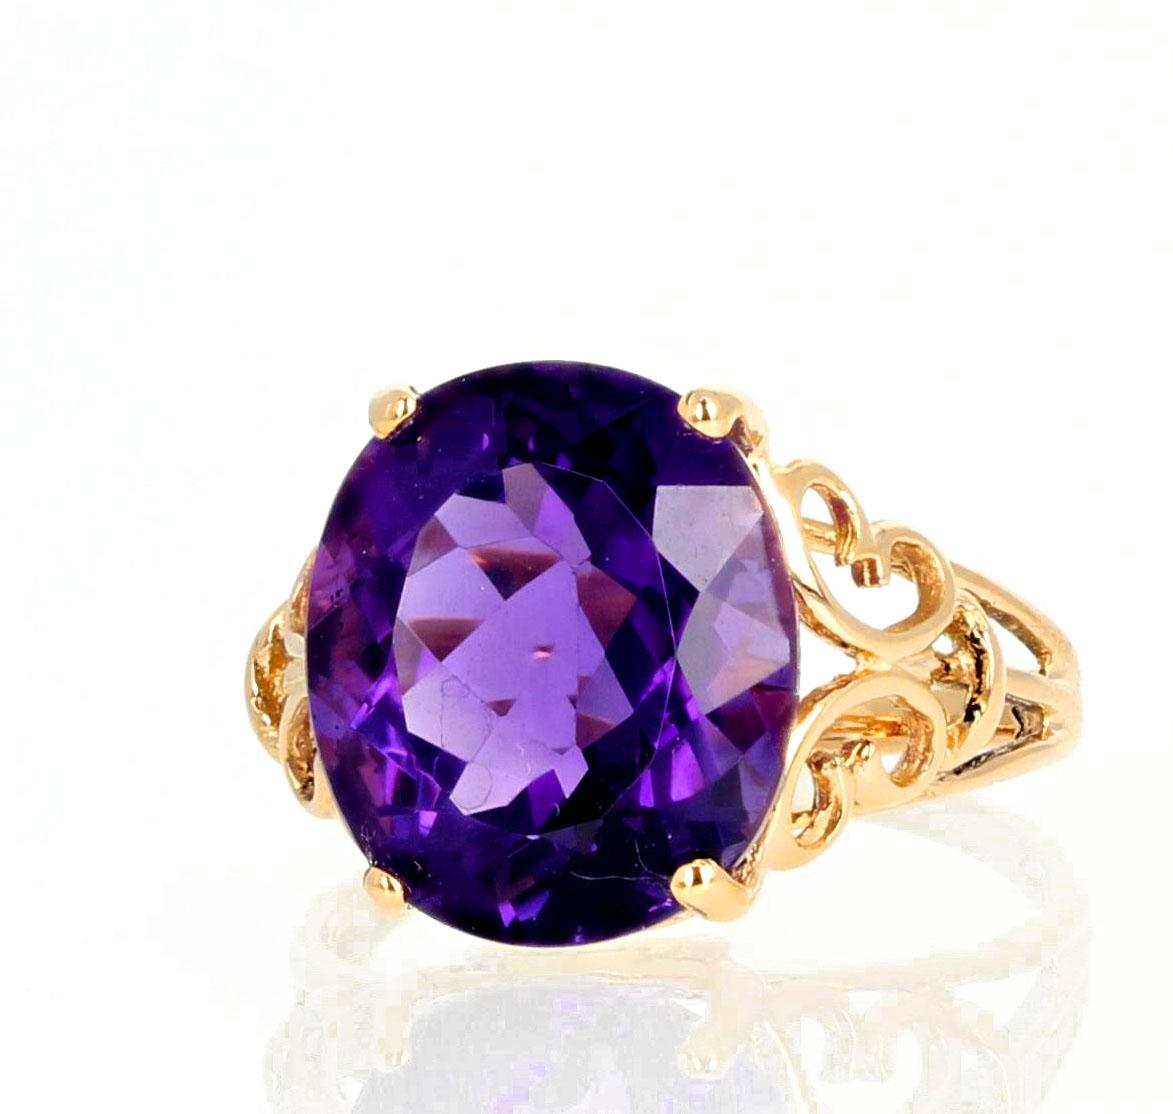 Whether its for a debutante or a sweet sixteen this ring will be treasured for a lifetime.  The intense purple of this 7.5 carat Amethyst gemstone sparkles in all light.  The 14Kt classic gold setting is never out of fashion.  